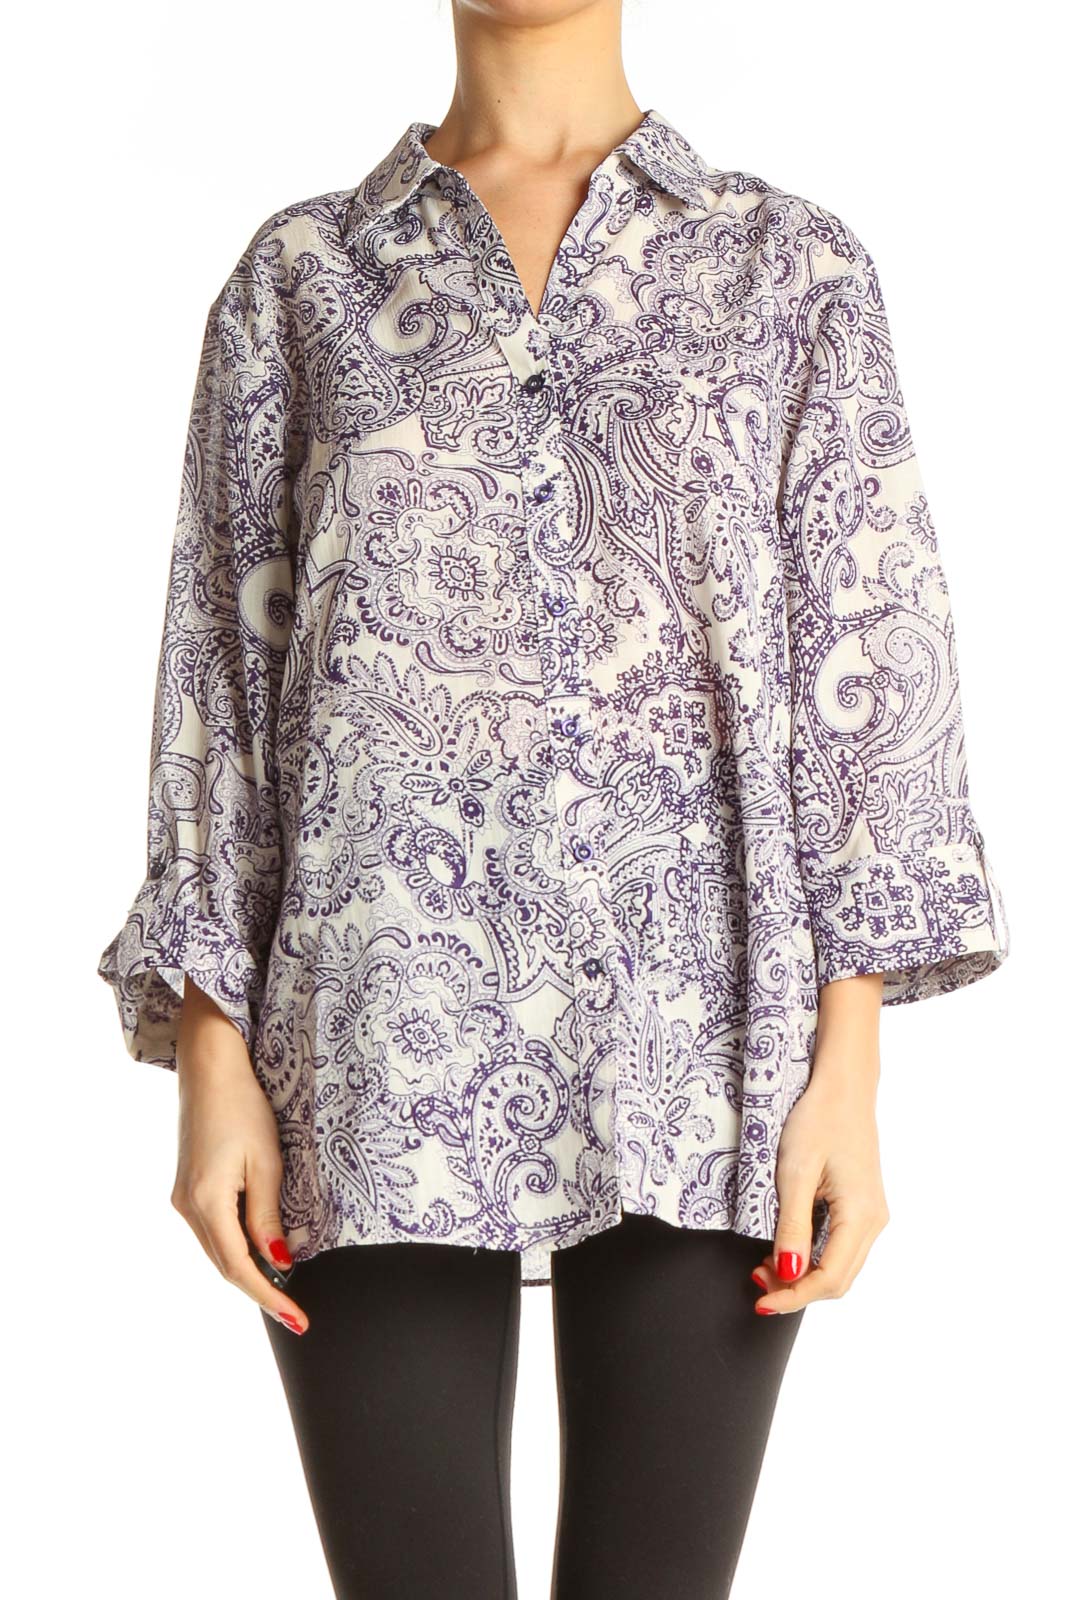 Purple Paisley All Day Wear Shirt Front